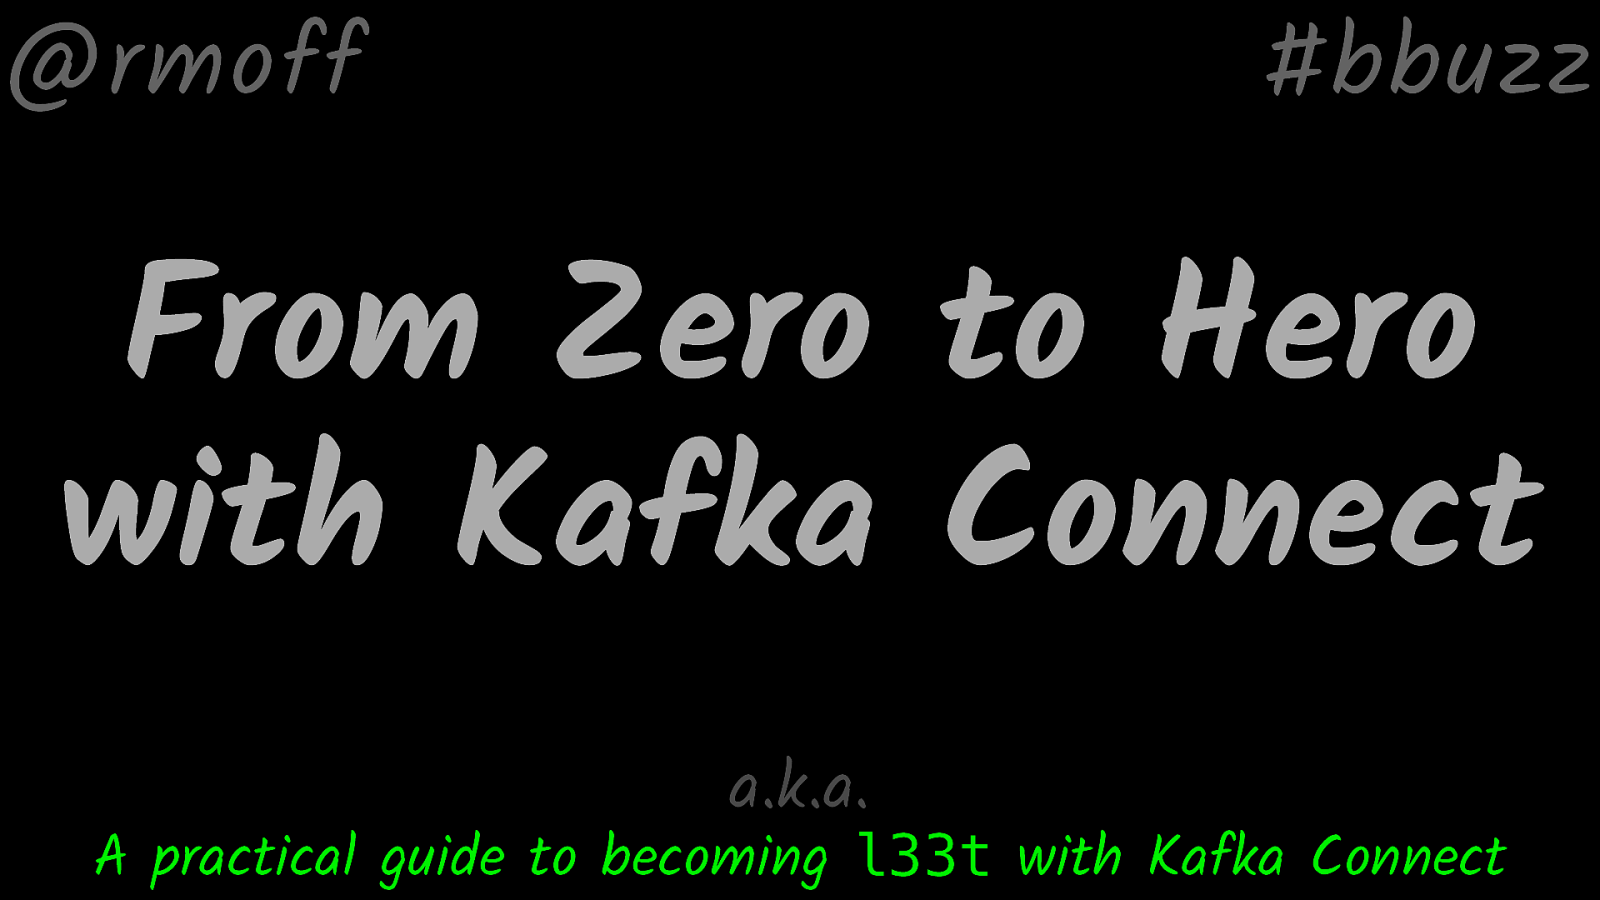 From Zero to Hero with Kafka Connect